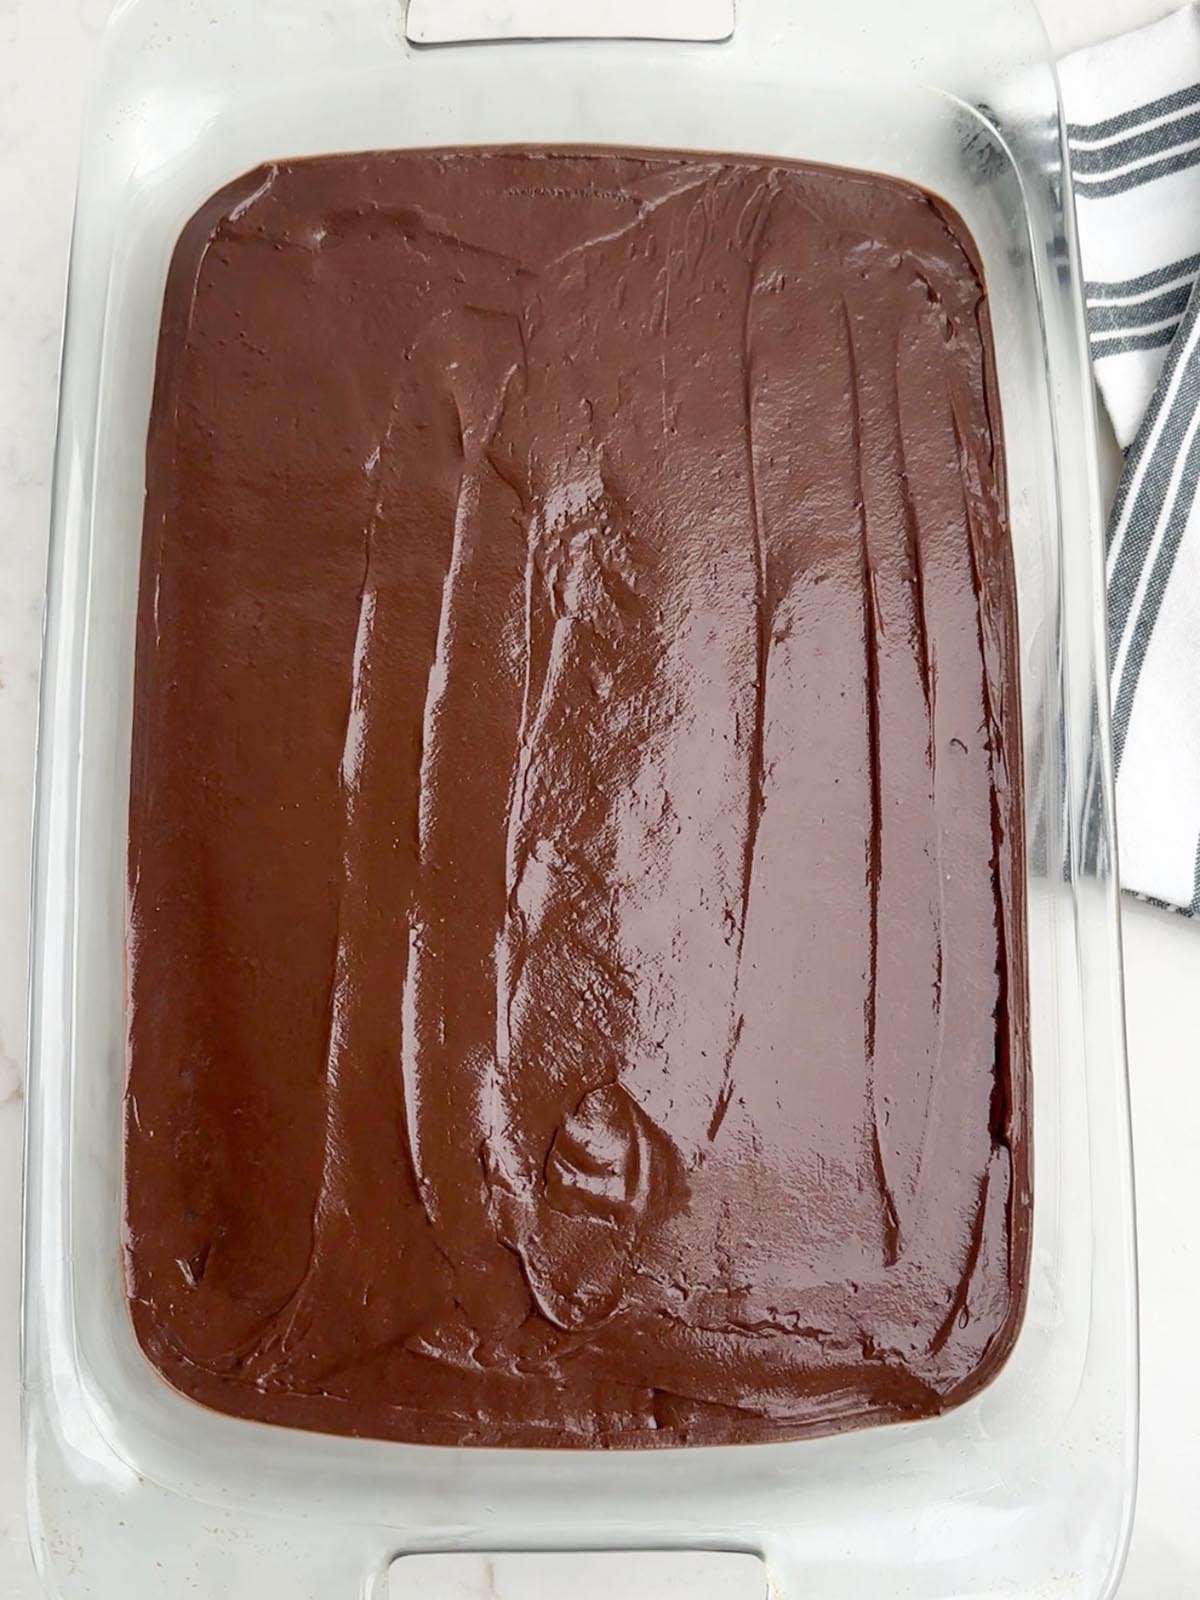 chocolate pudding layer smoothed on top of dessert